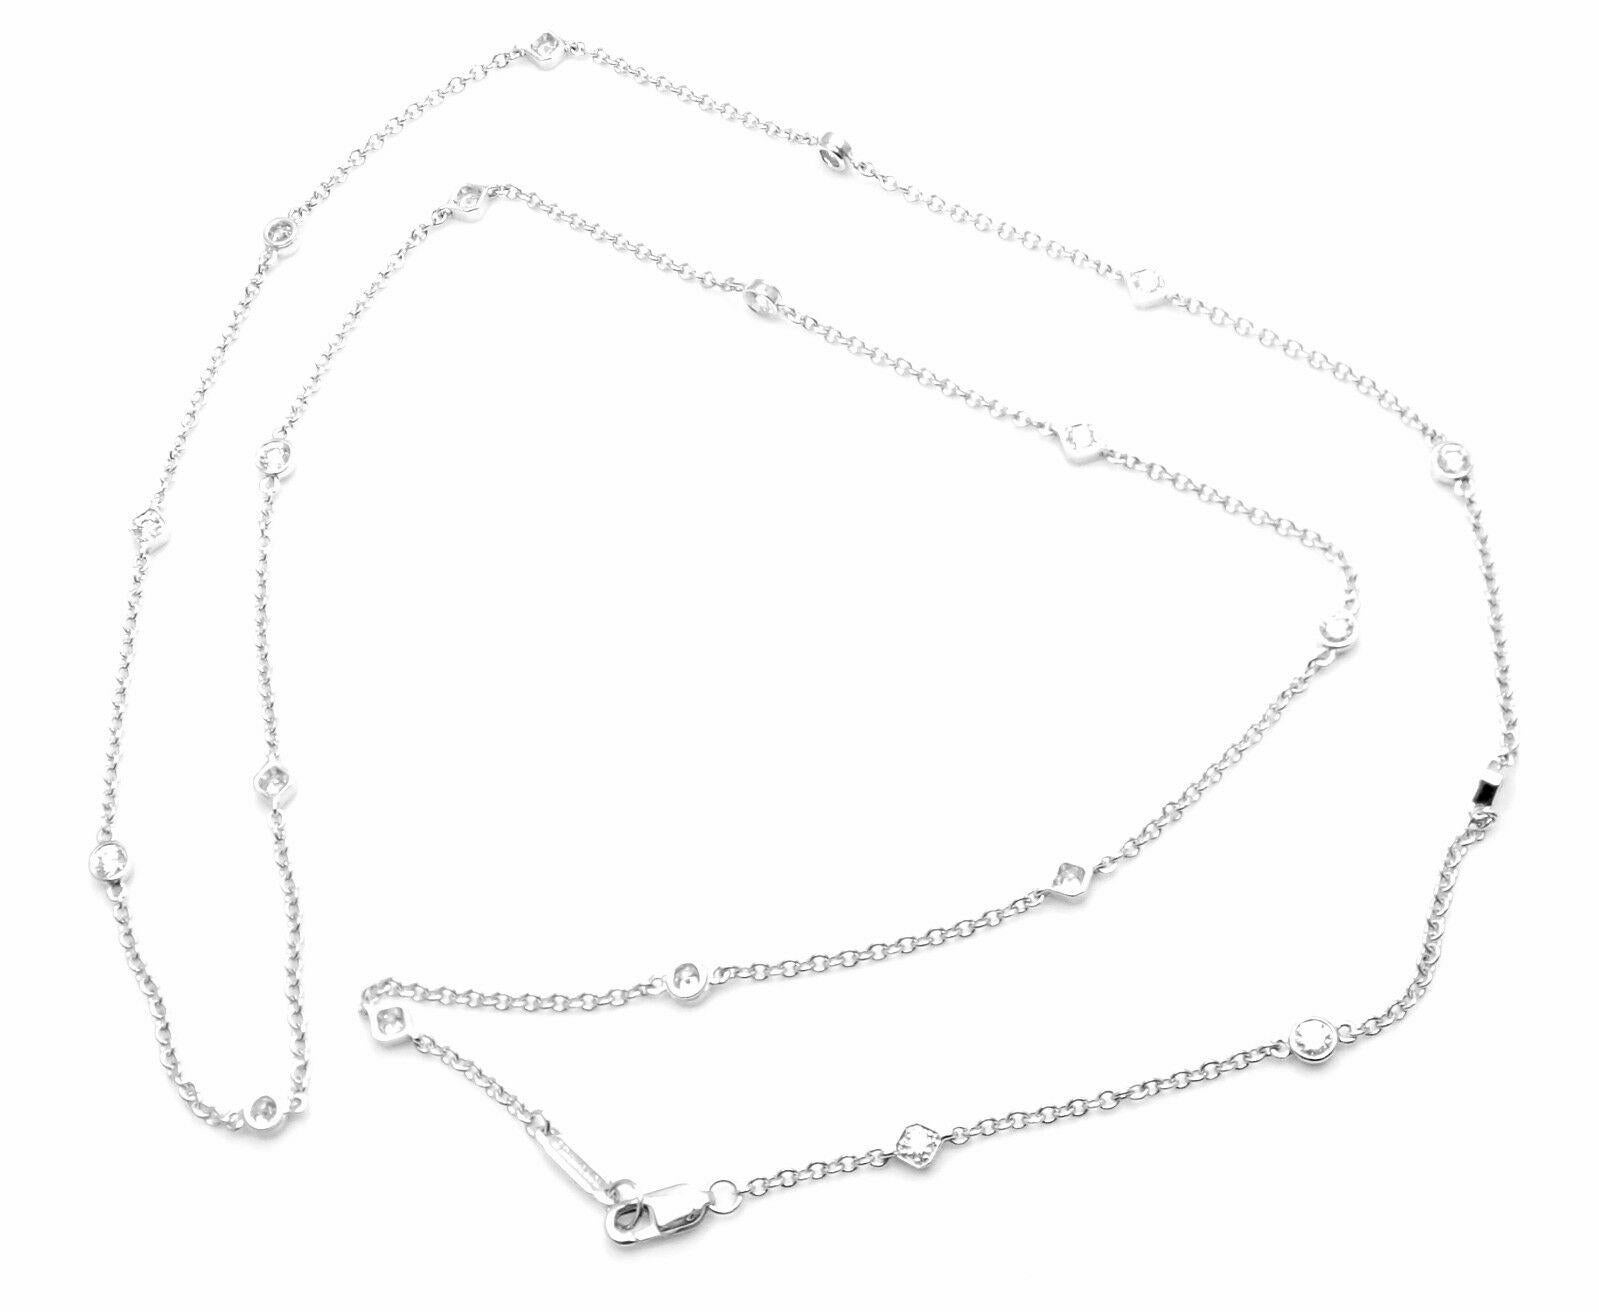 Women's or Men's Tiffany & Co. Diamonds by The Yard Platinum Chain Necklace